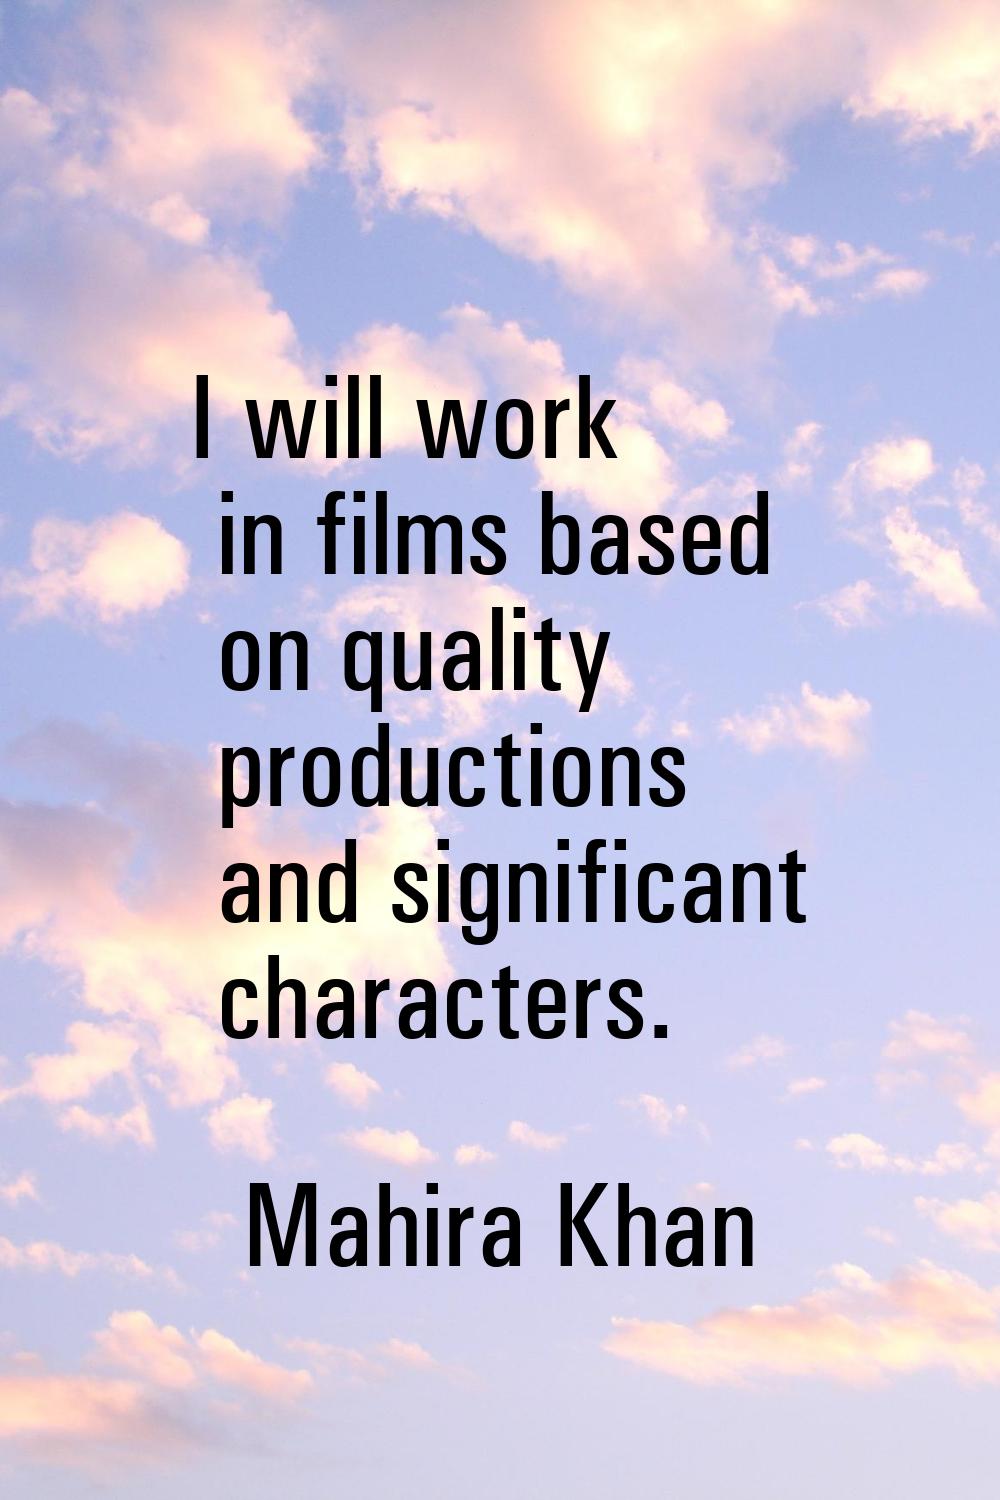 I will work in films based on quality productions and significant characters.